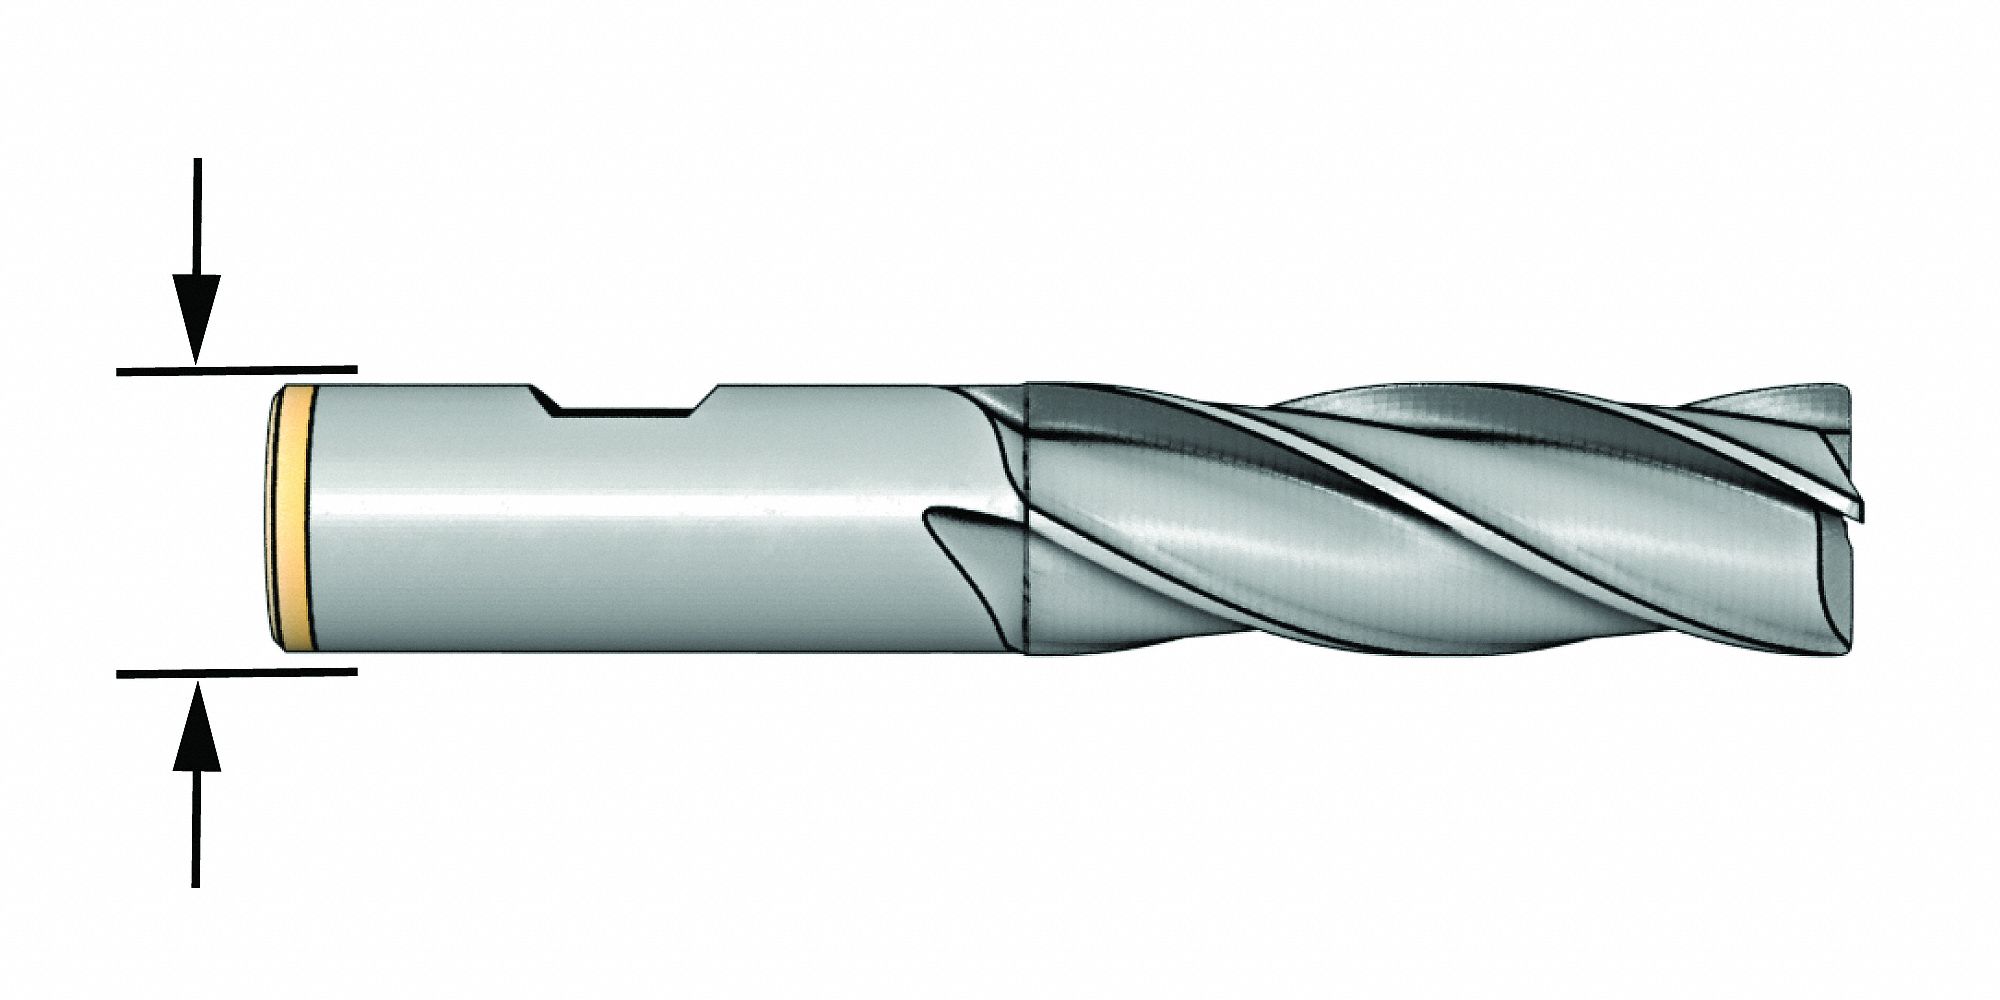 Cleveland C75173 Square End Mill 1-5/8 L of Cut TiN 